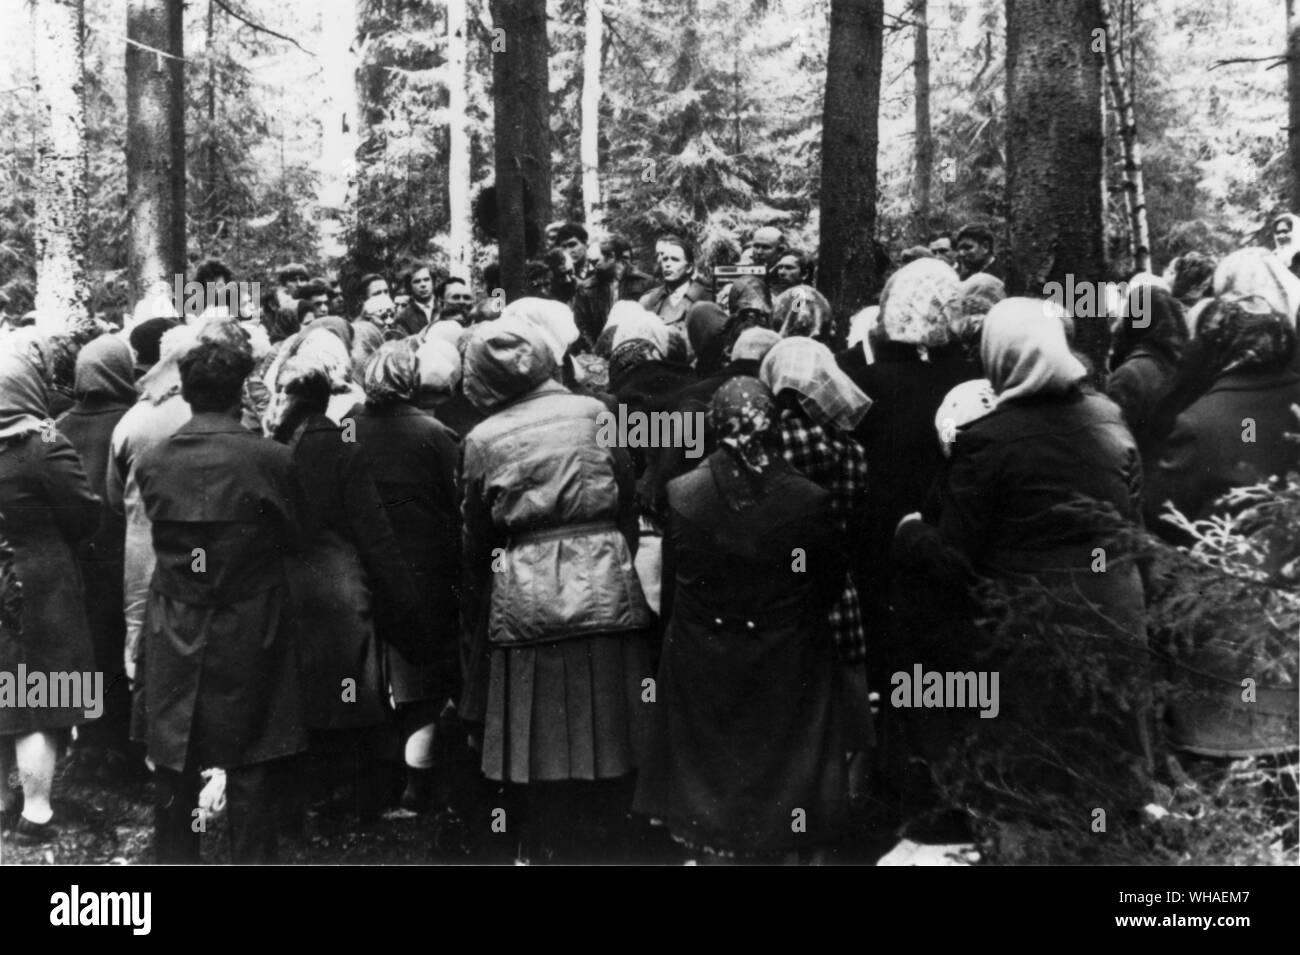 Religious persecution both Christian and Jewish is a commonplace feature of Soviet Life under the rule of the KGB. Here, the Moscow Pentecostal Church holds a prayer meeting in the depths of the forest using music from a tape recorder Stock Photo